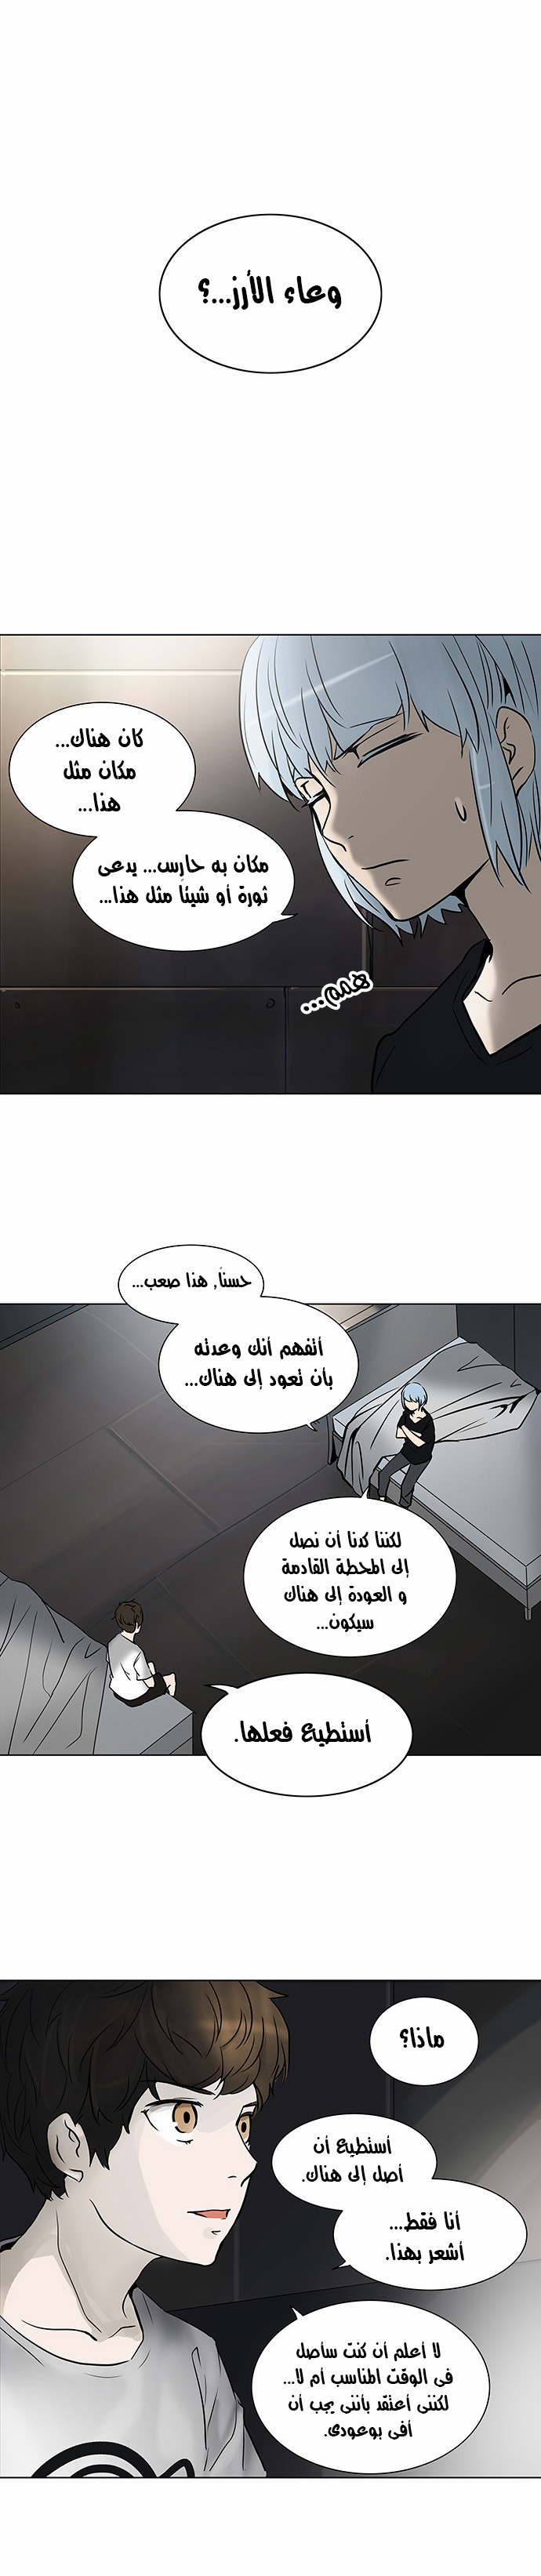 Tower of God 2: Chapter 199 - Page 1